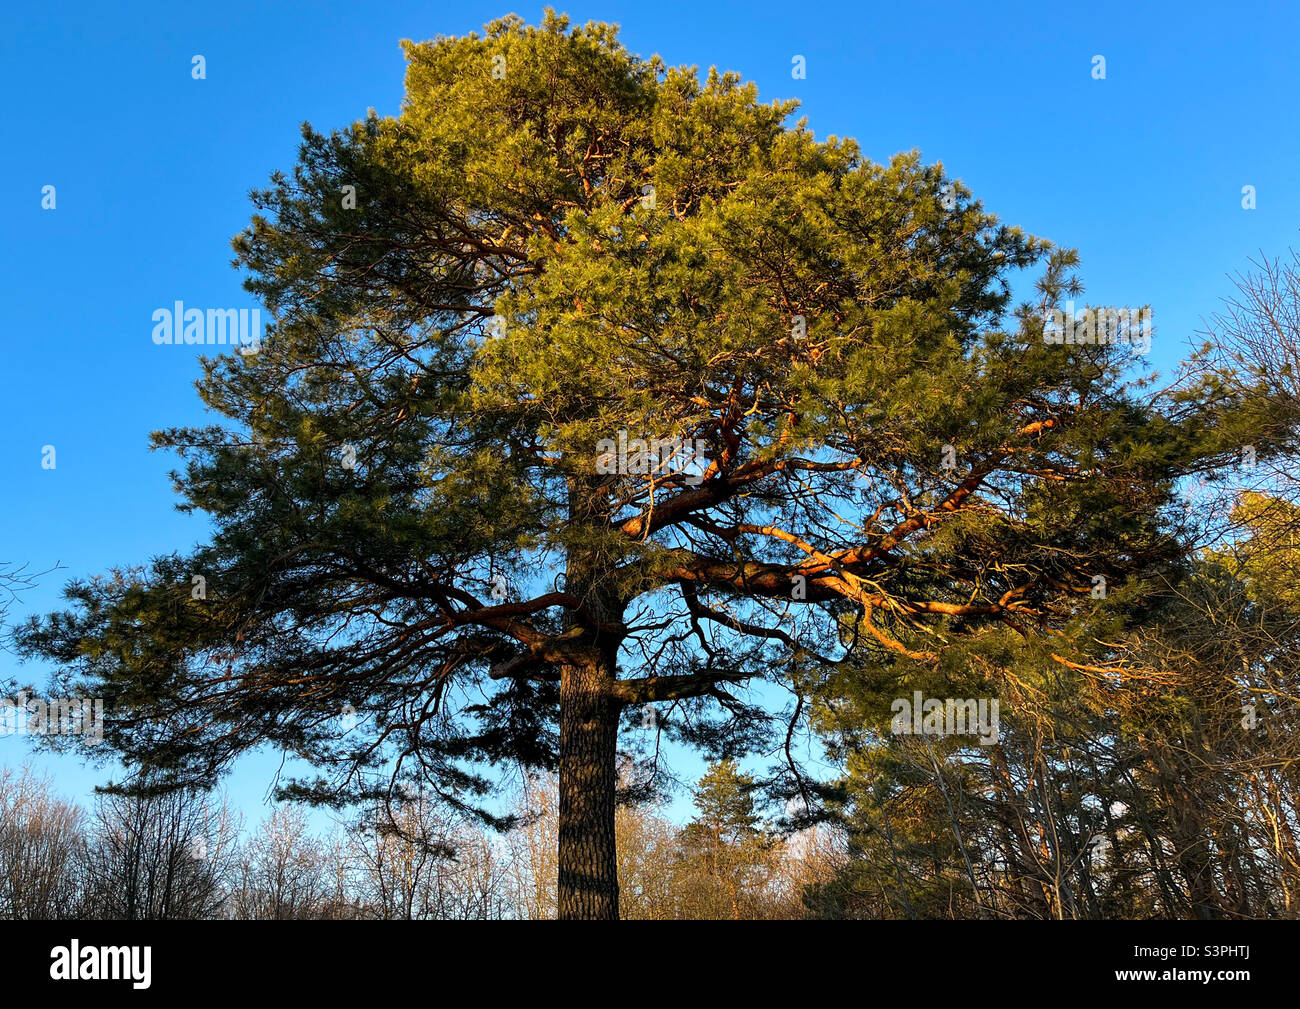 A big and old pine tree in the forest against the blue sky Stock Photo